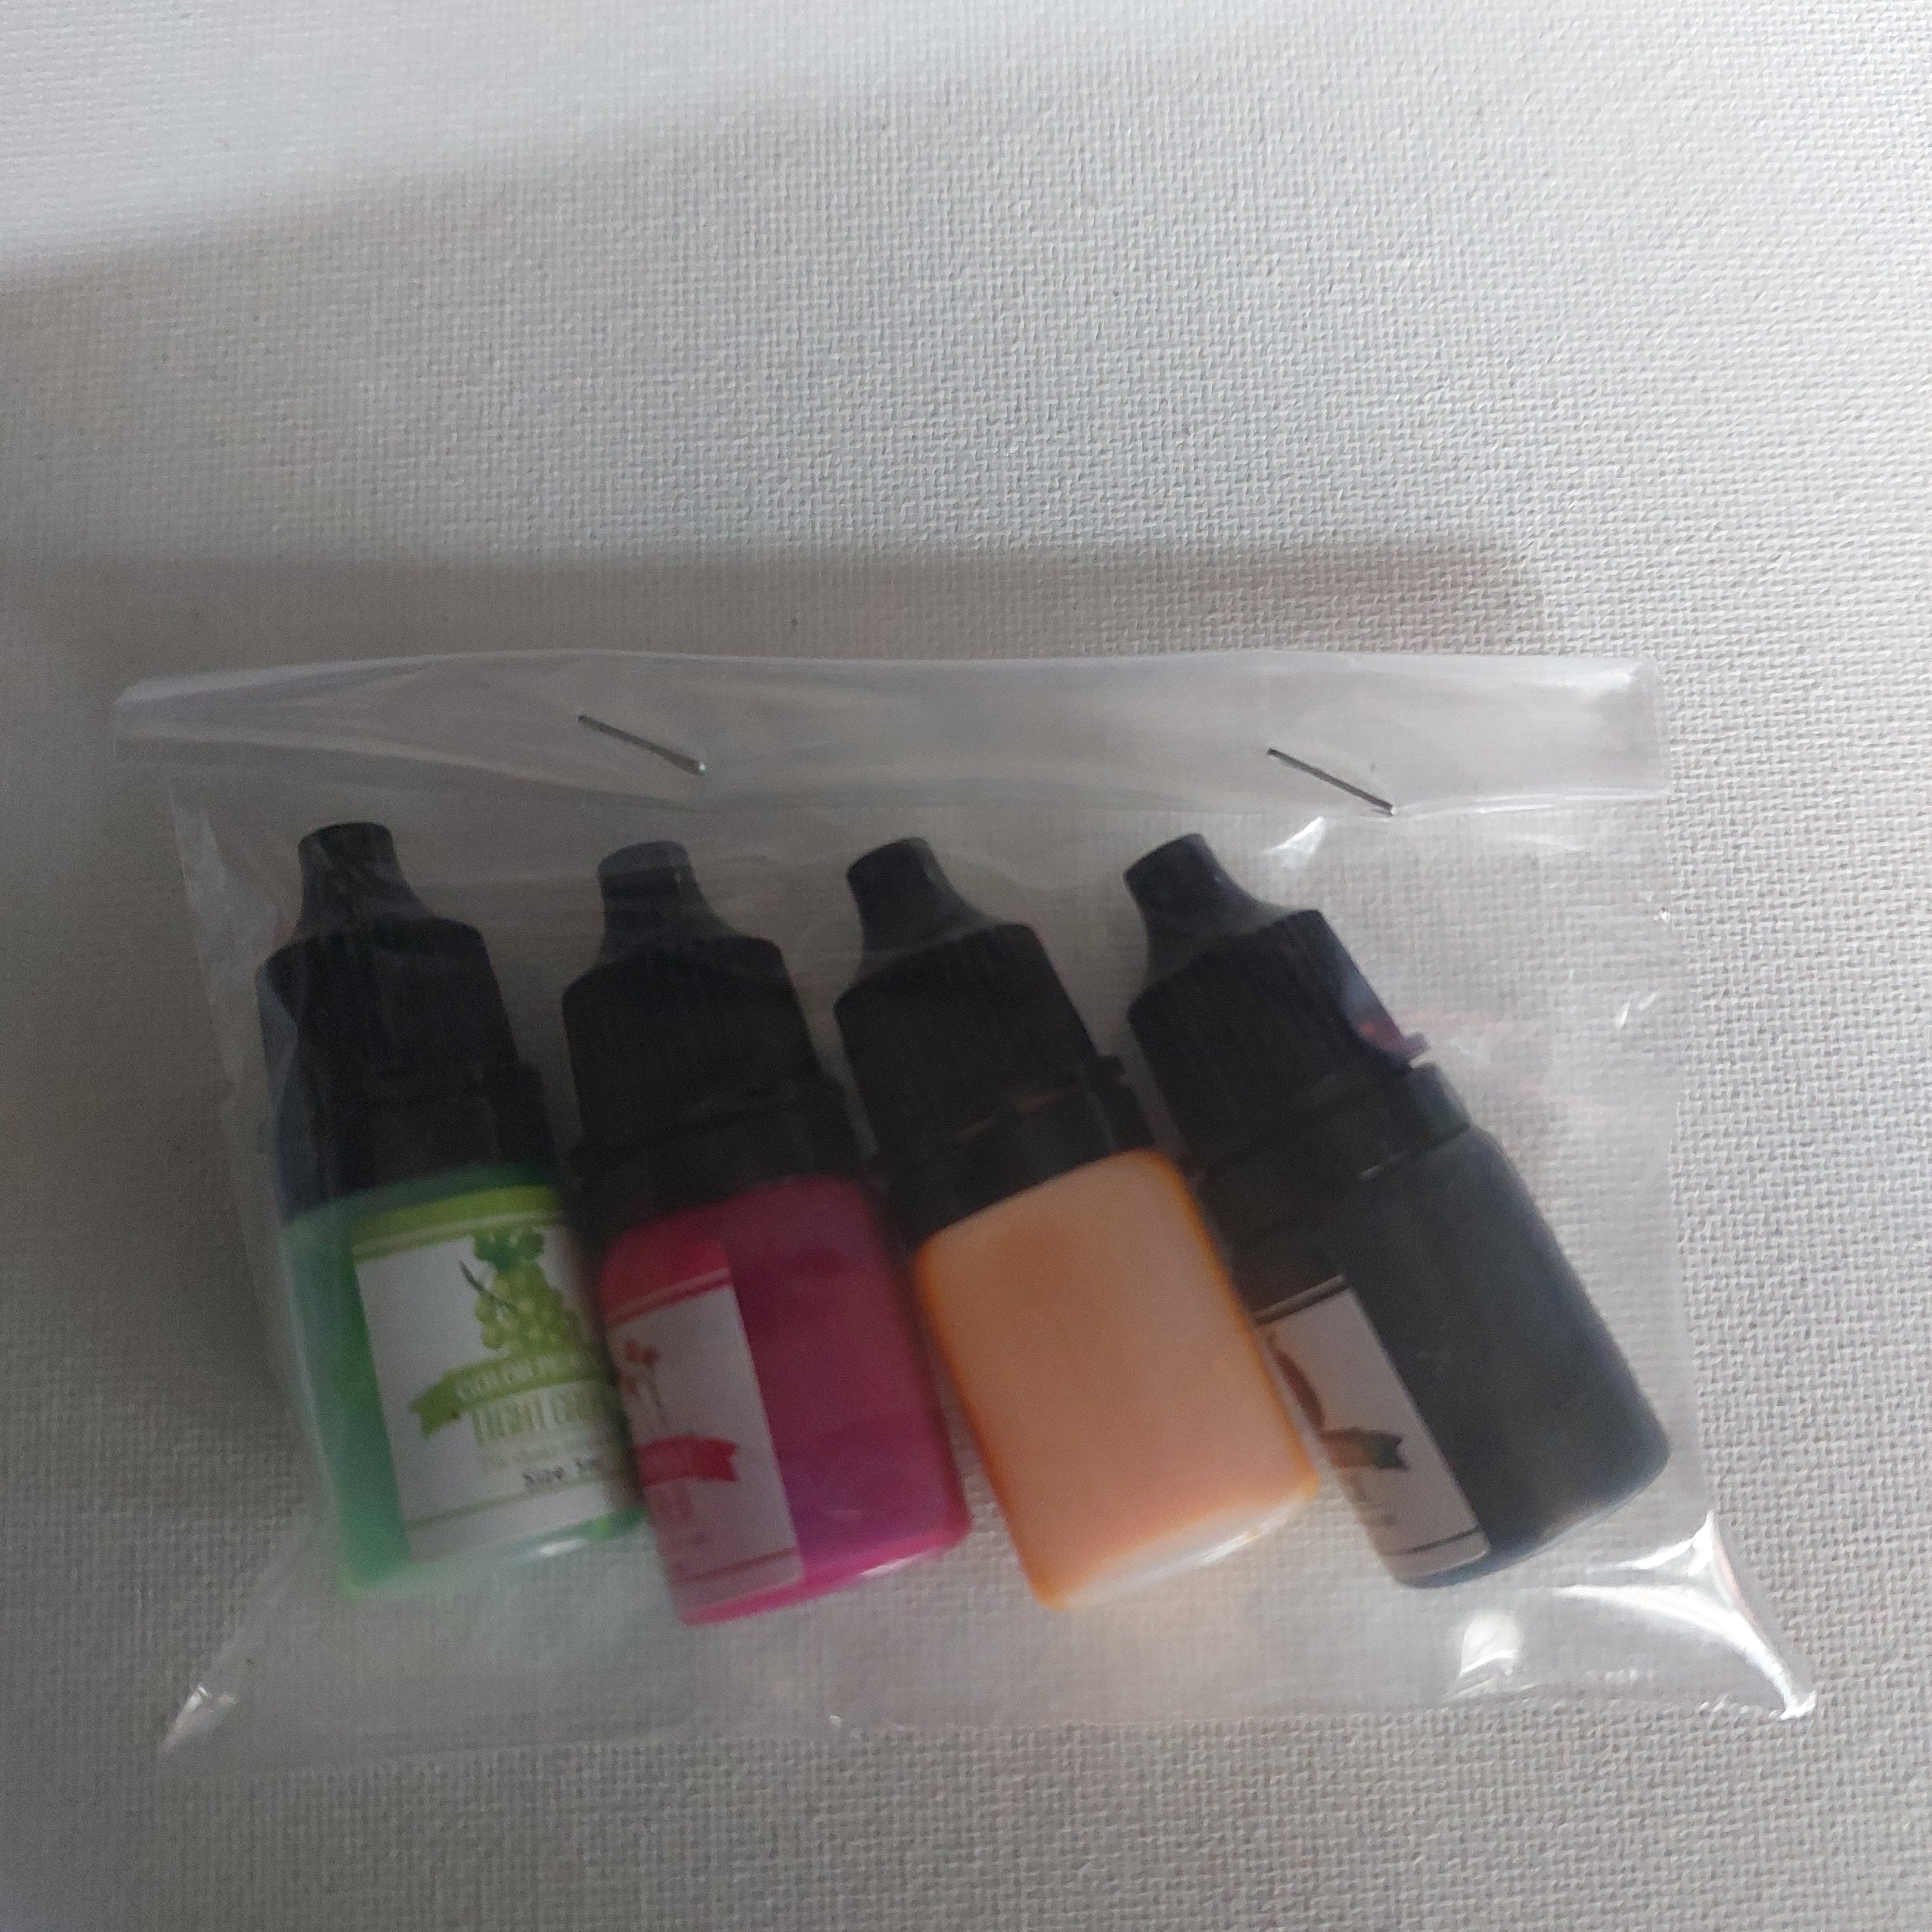 Resin pigment set of 4 assorted colors bottle in a pack